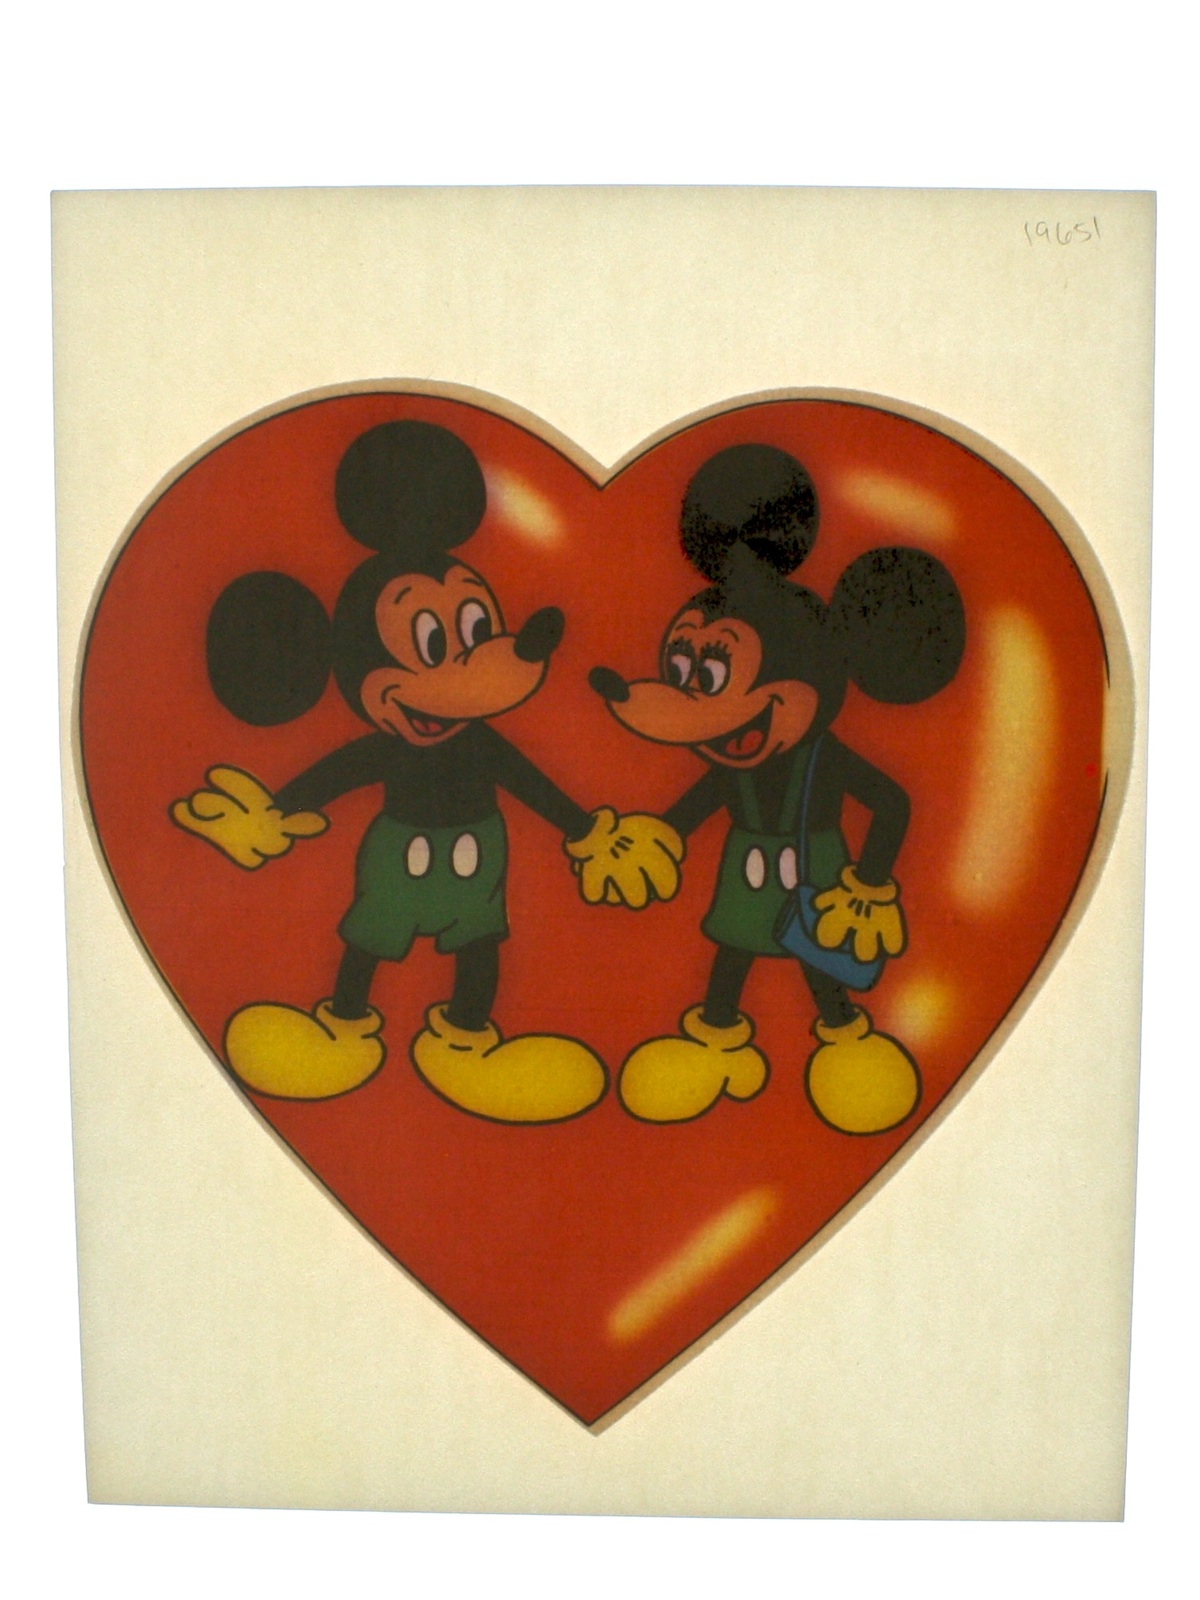 Seventies Iron-On Transfer for T-Shirts (t shirt iron ons): 70s -Mickey  Mouse and Minnie Mouse- iron-on t-shirt transfer (not real Disney)  (Professional press required. Instructions to provide to a t-shirt shop are